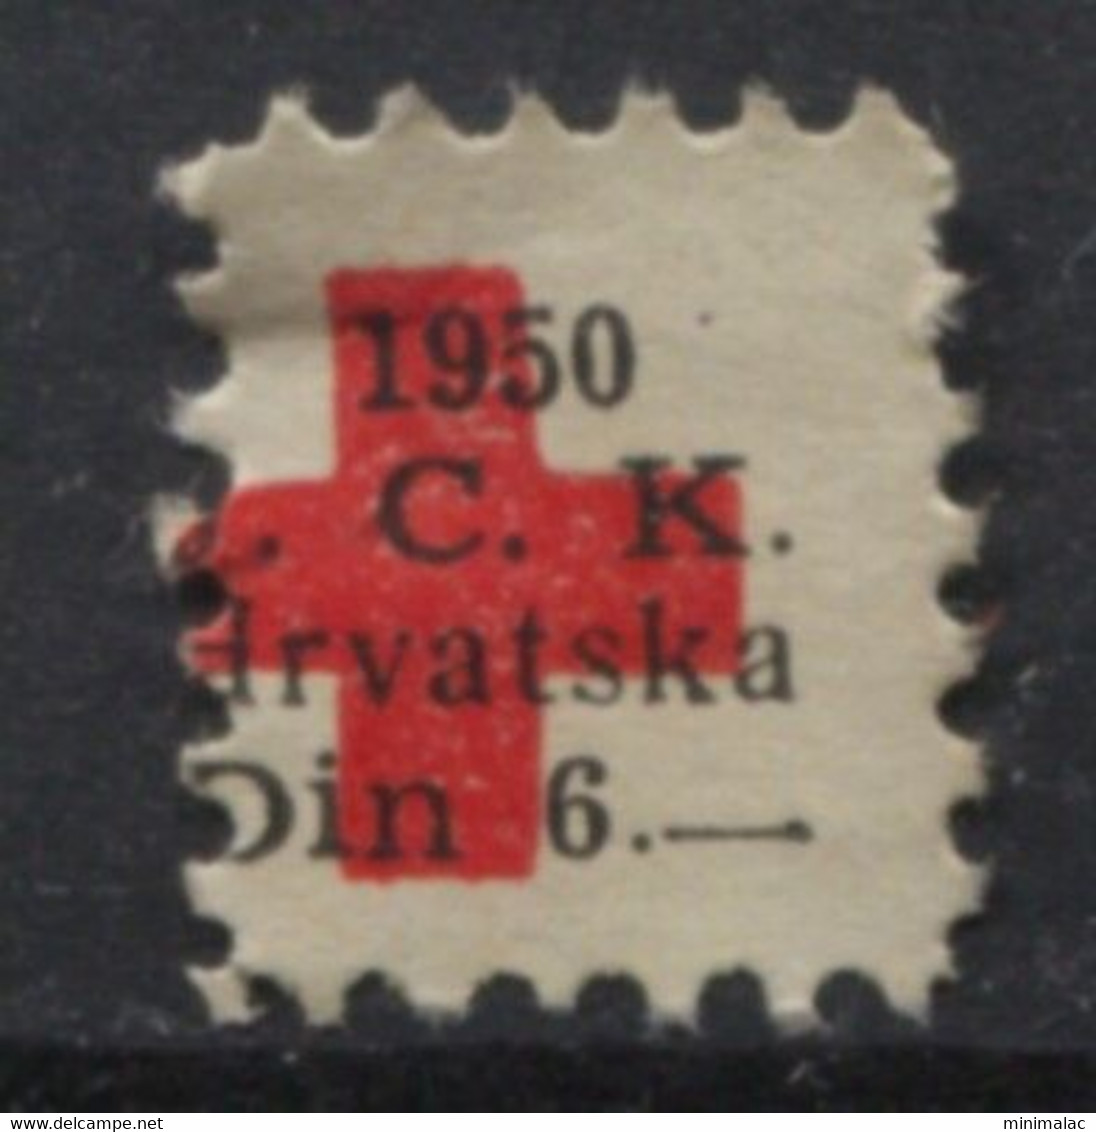 Yugoslavia - Croatia 1950, Stamp For Membership, Red Cross, Administrative Stamp Revenue, Tax Stamp, Din 6 - Officials